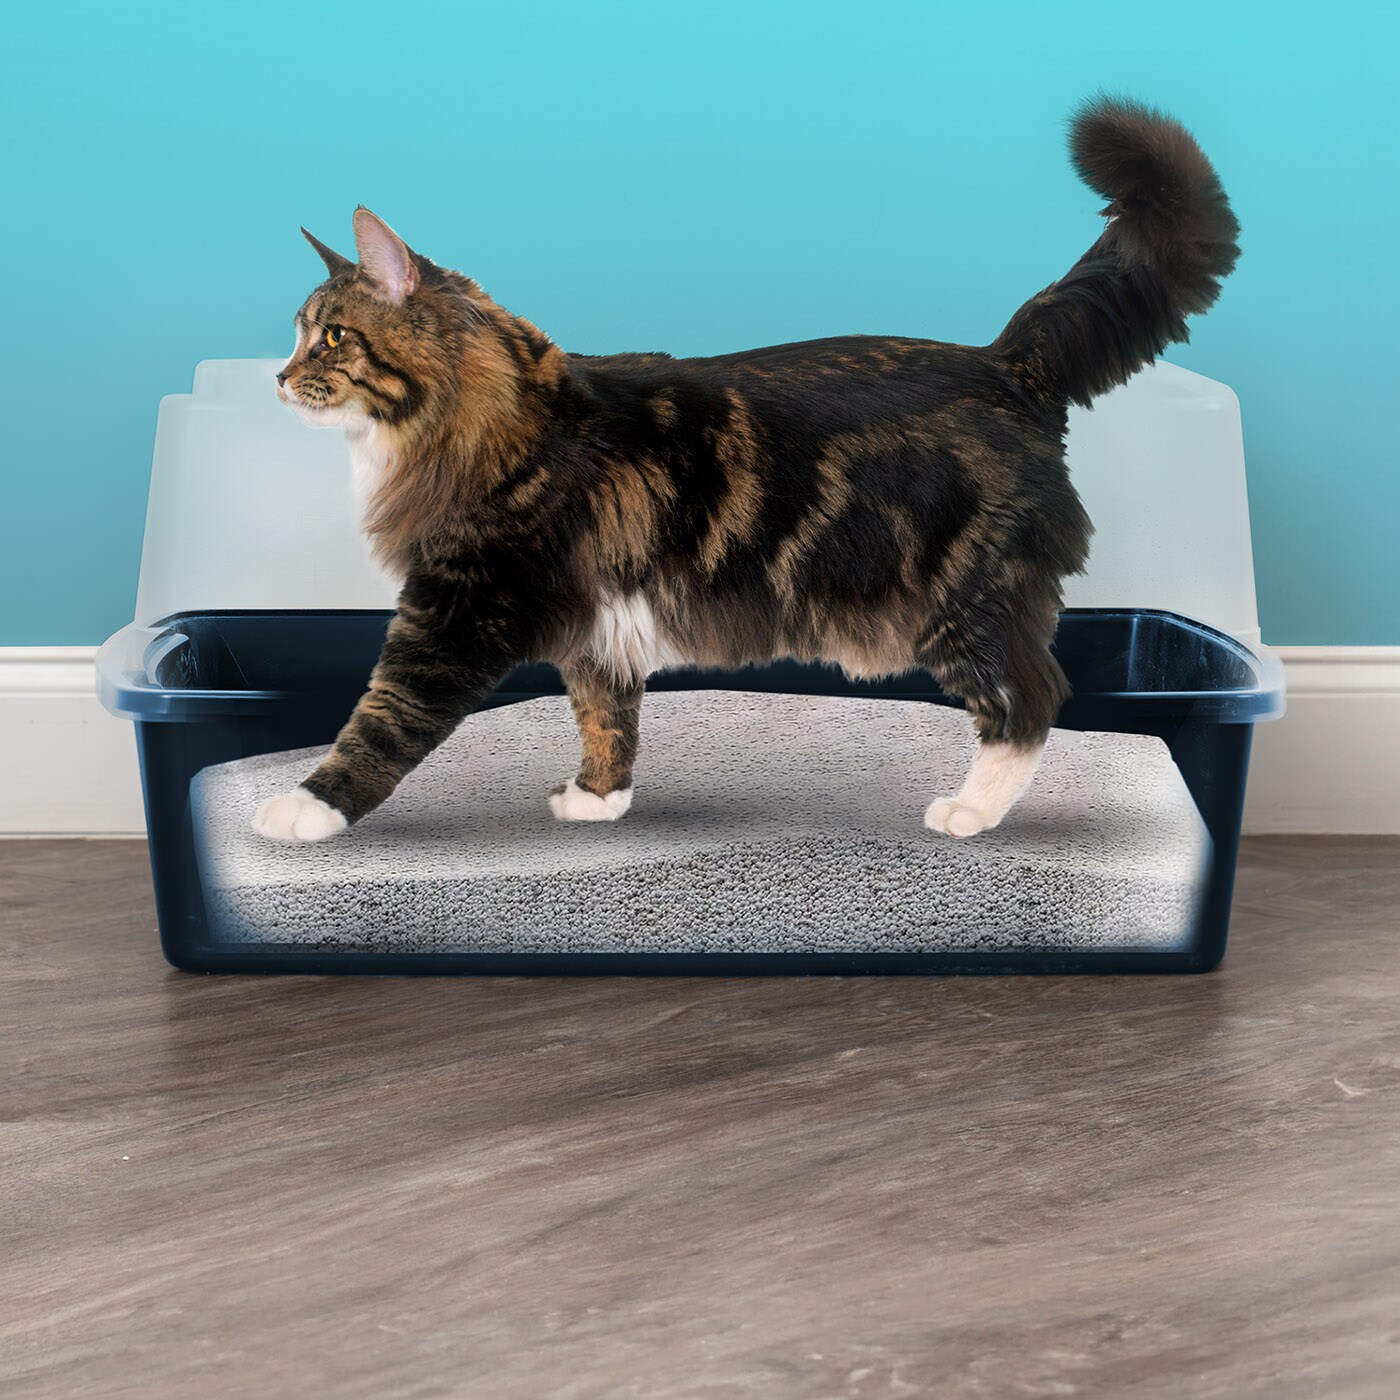 IRIS USA Extra Large Open Top Cat Litter Box with Scatter Shield, Sturdy Easy to Clean Open Air Kitty Litter Pan with Tall Spray